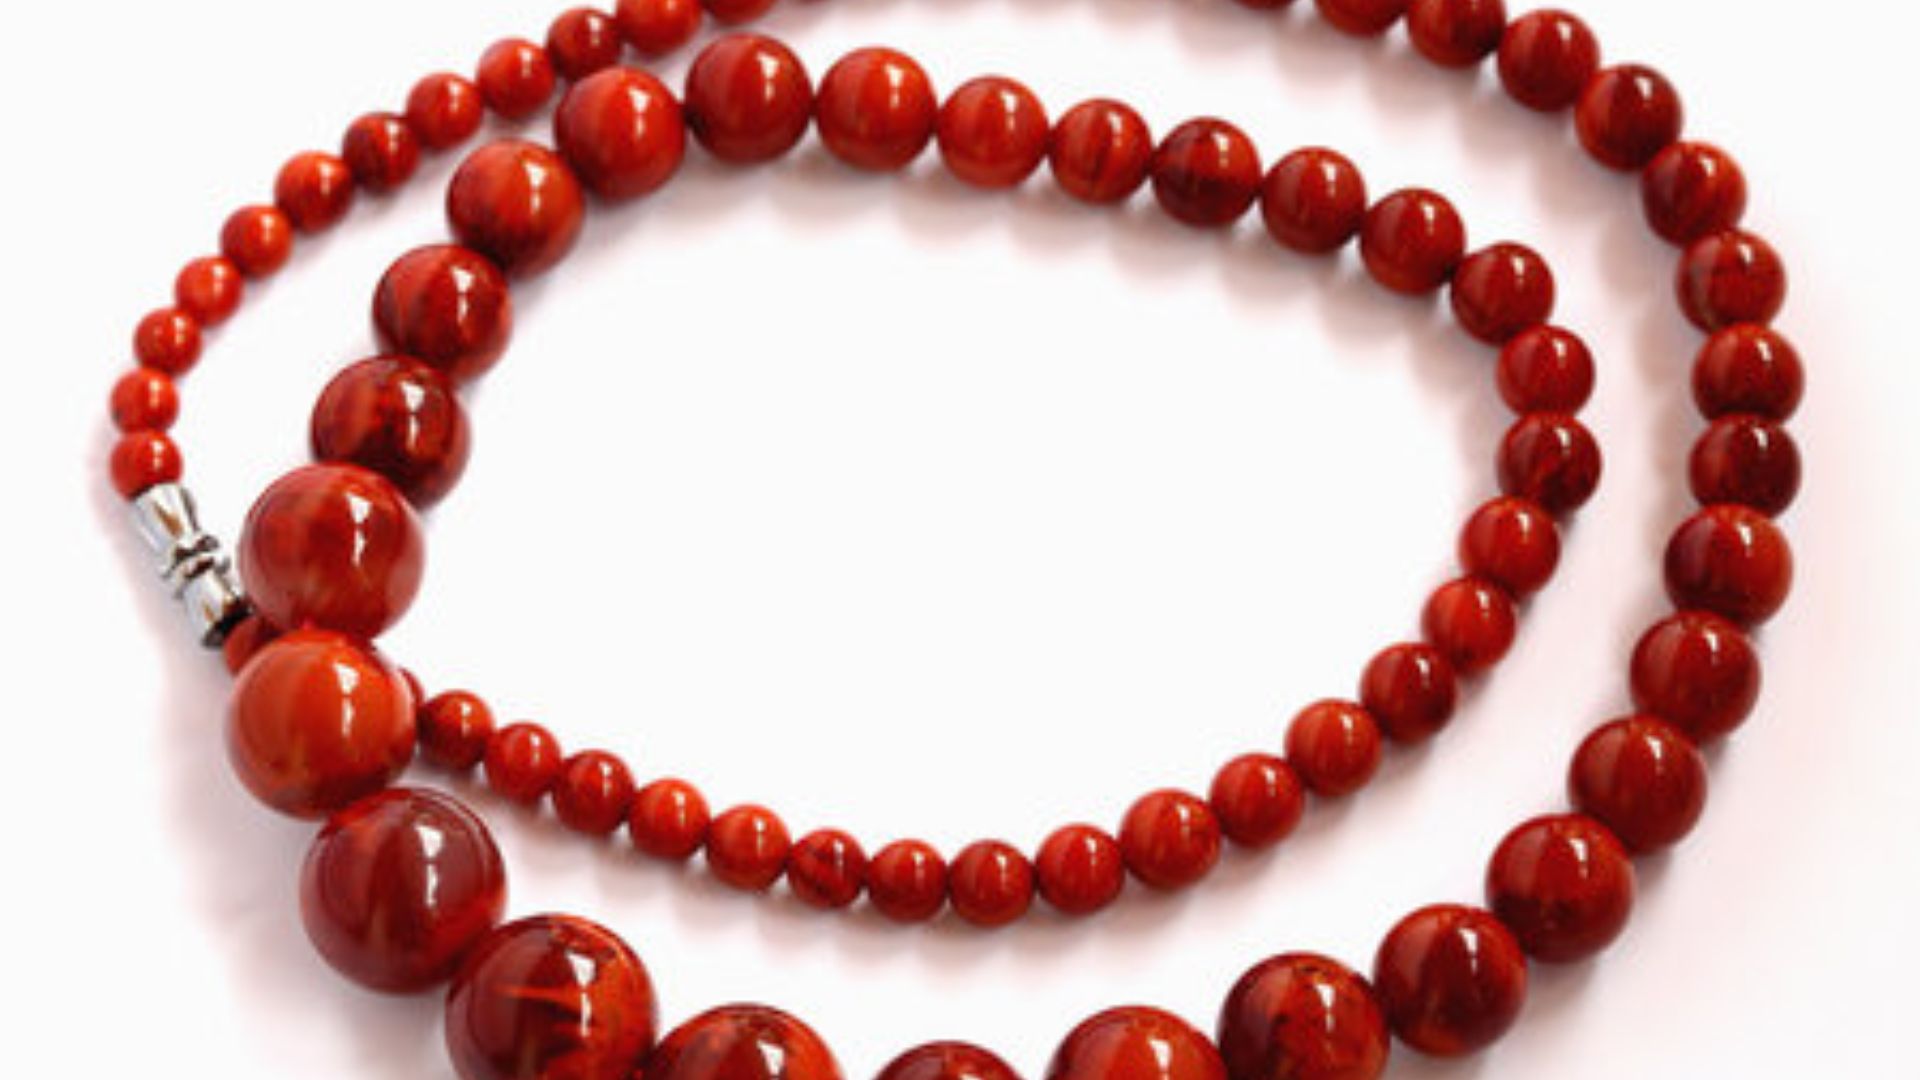 Beads Of Red Colored Gemstone